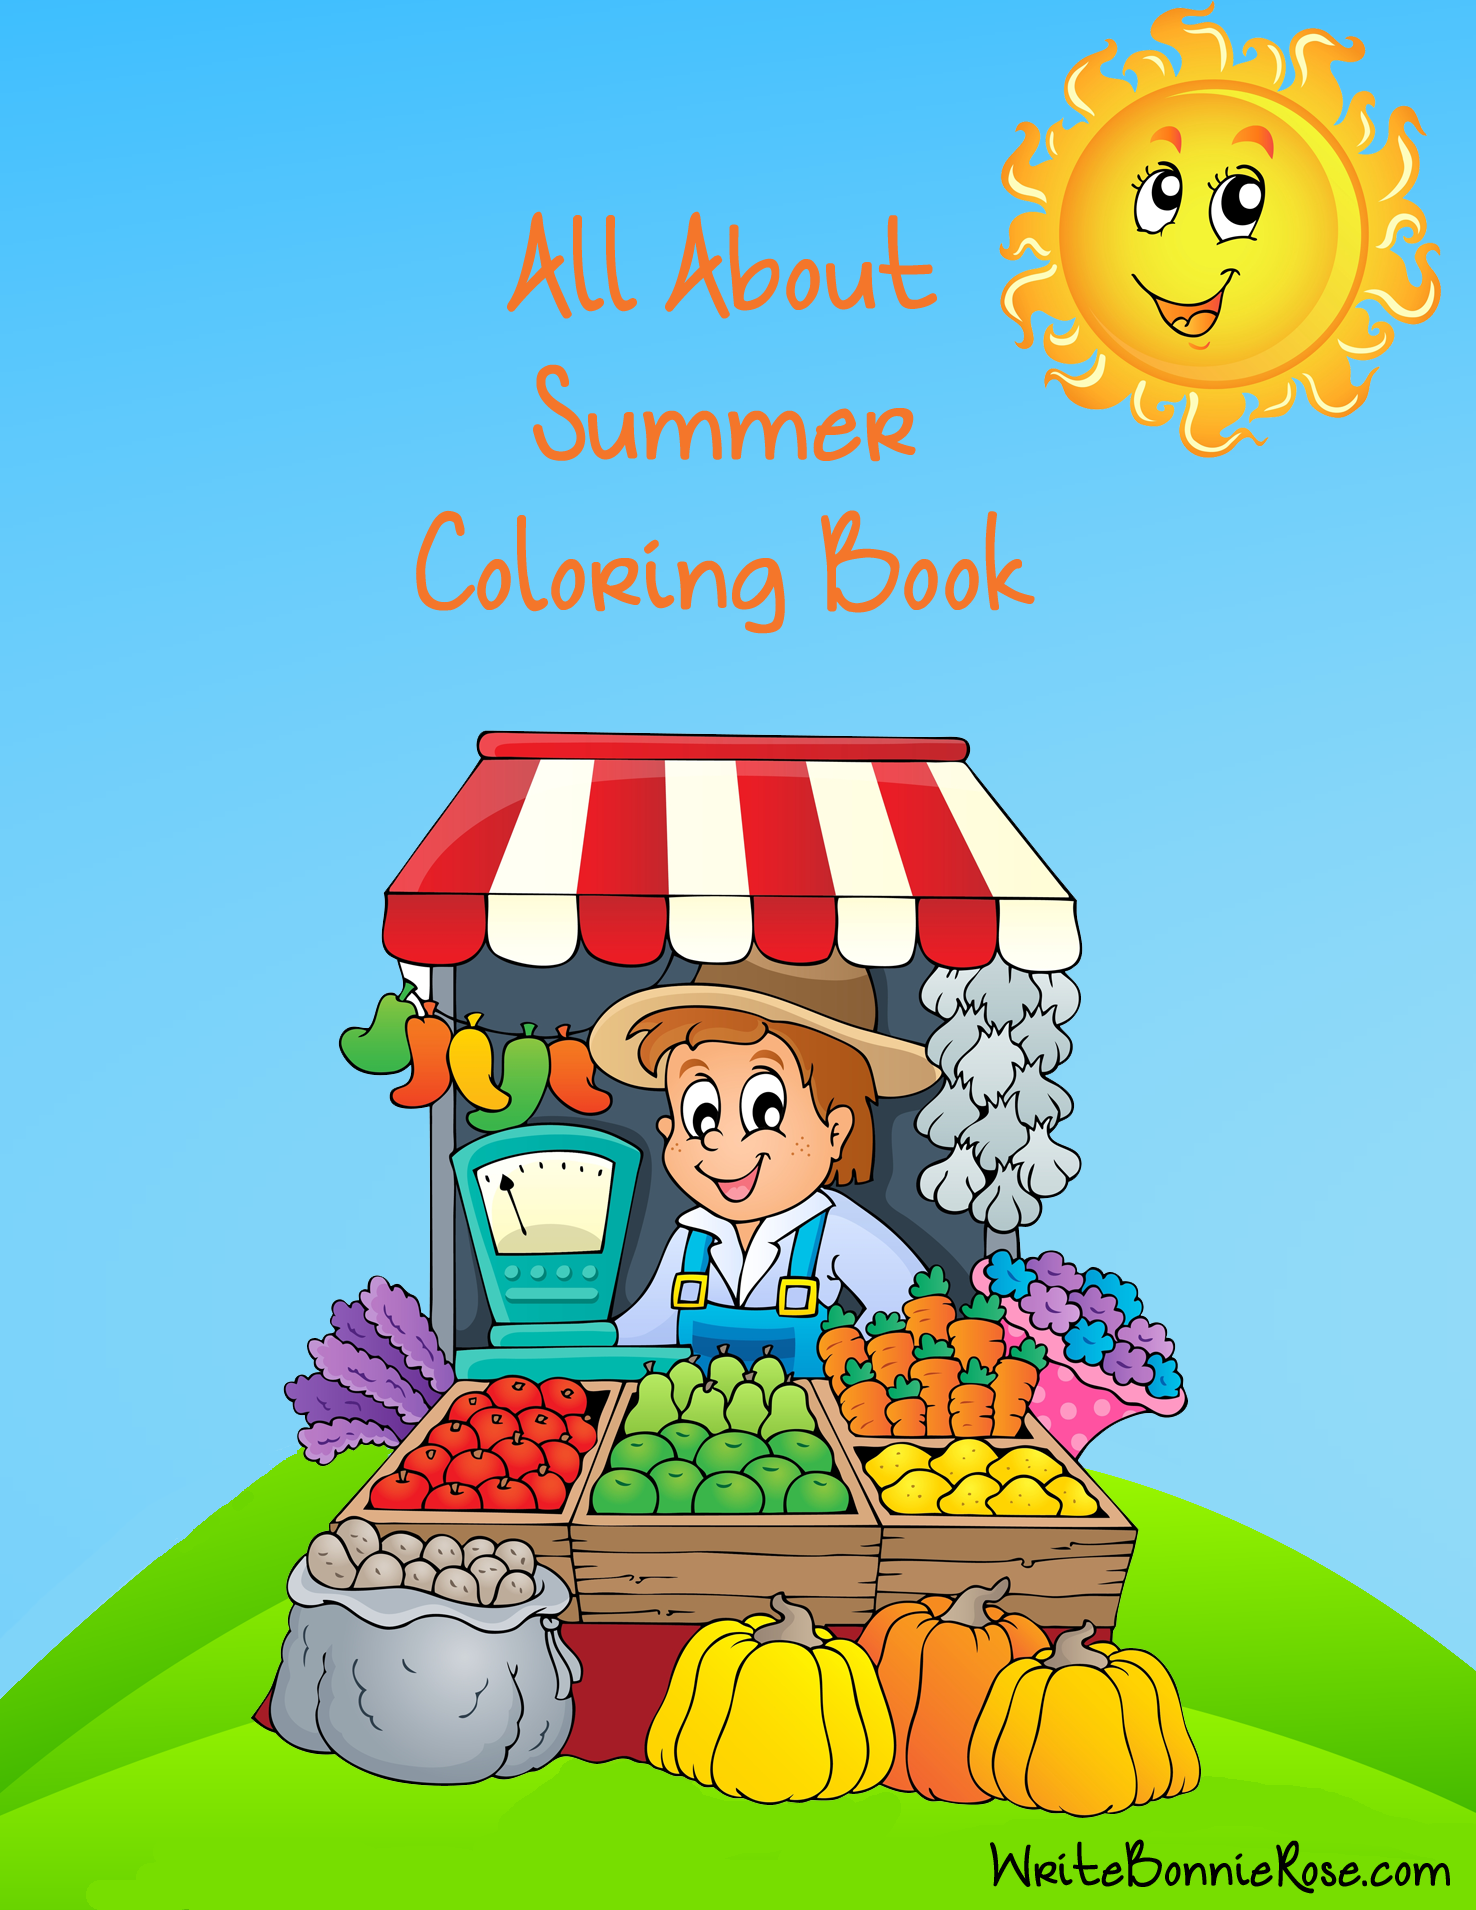 All About Summer Coloring Book - WriteBonnieRose.com